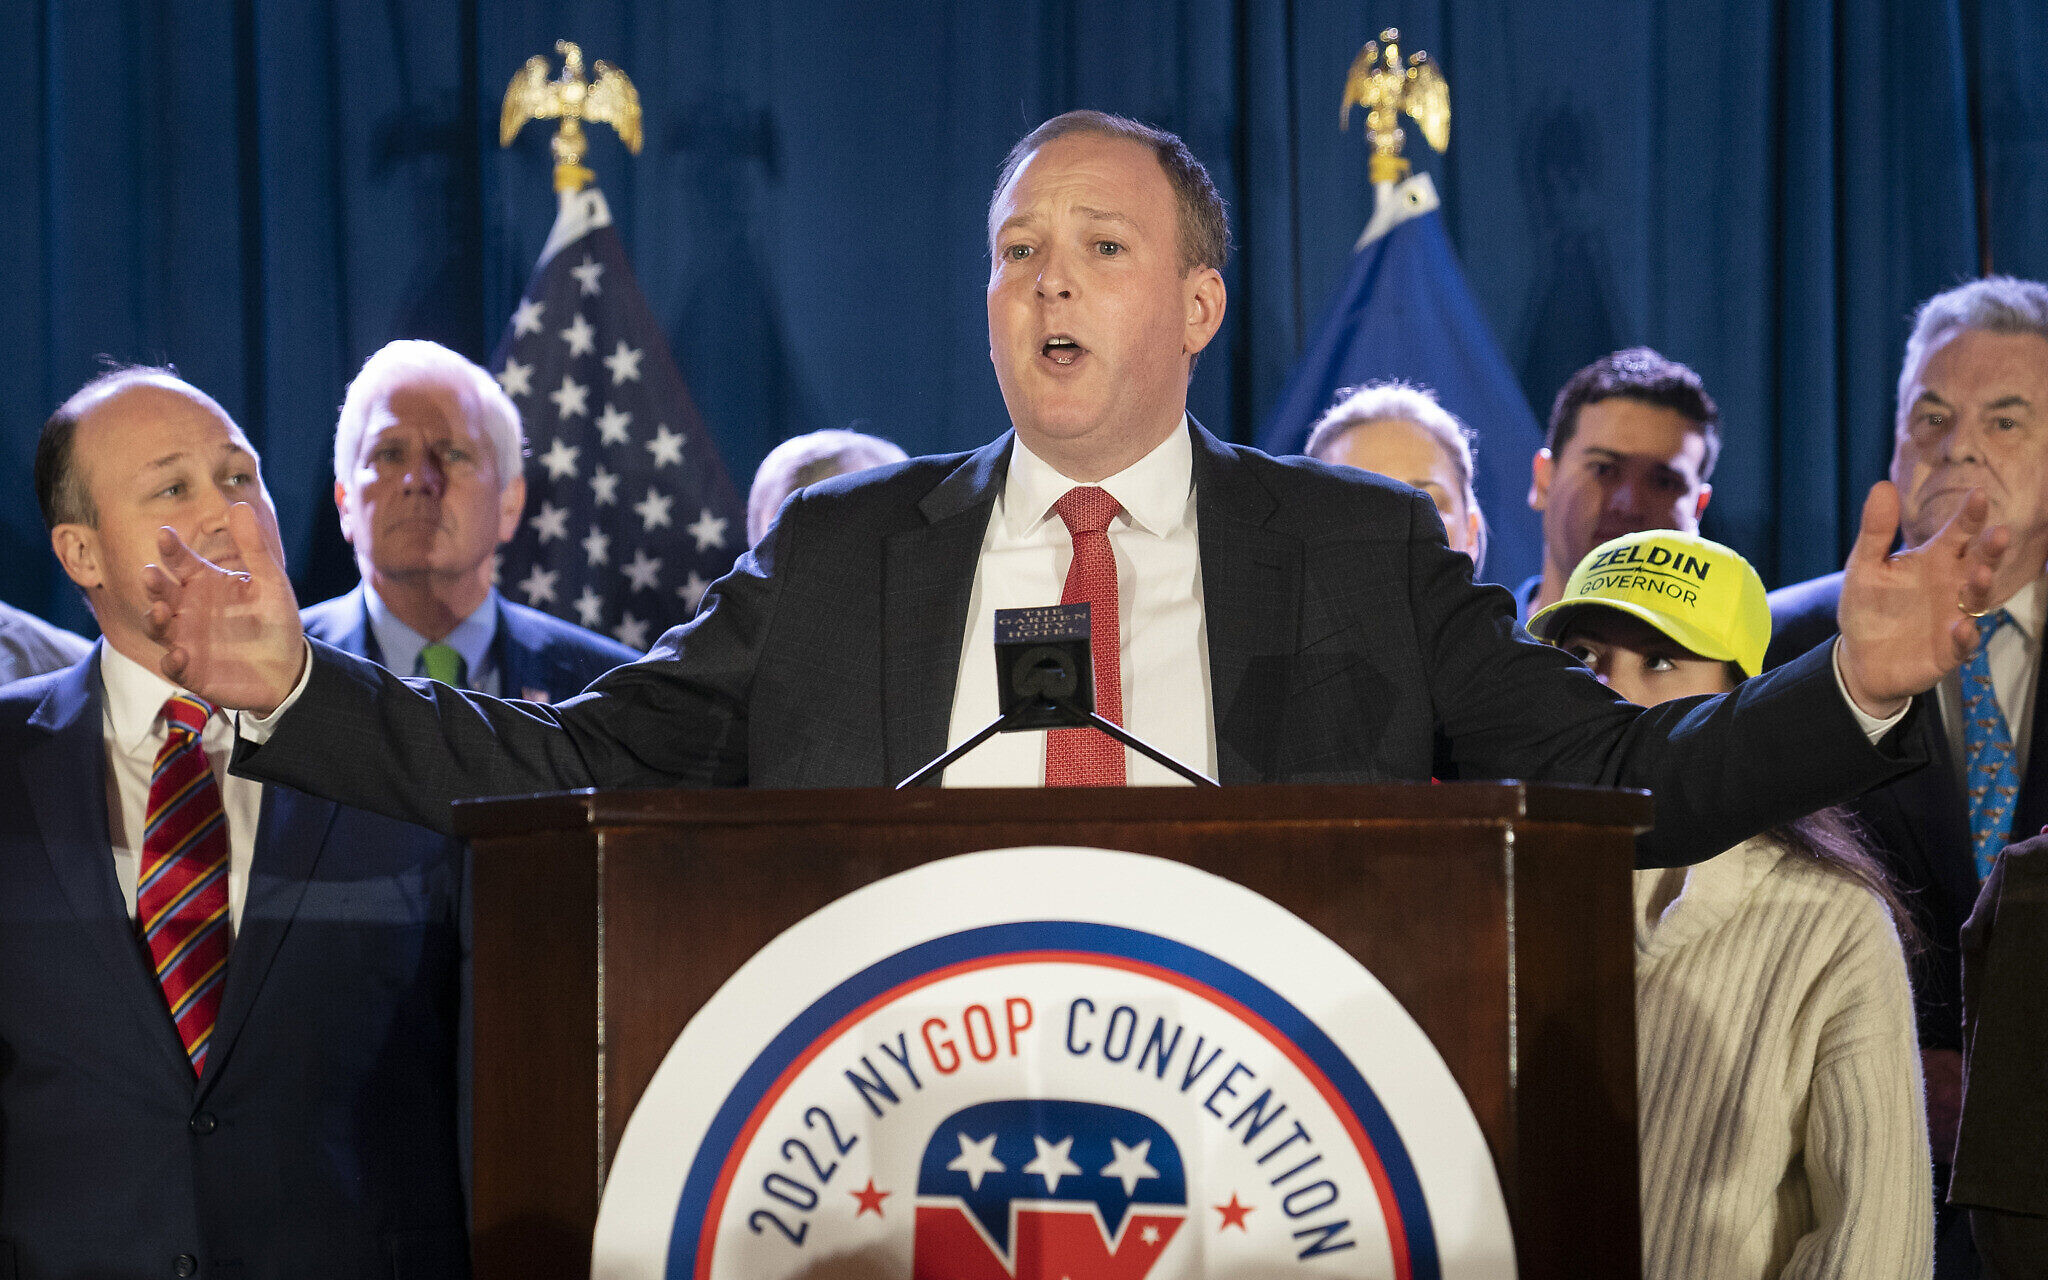 Jewish Republican Lee Zeldin endorsed by GOP leaders in NY governor's race  | The Times of Israel